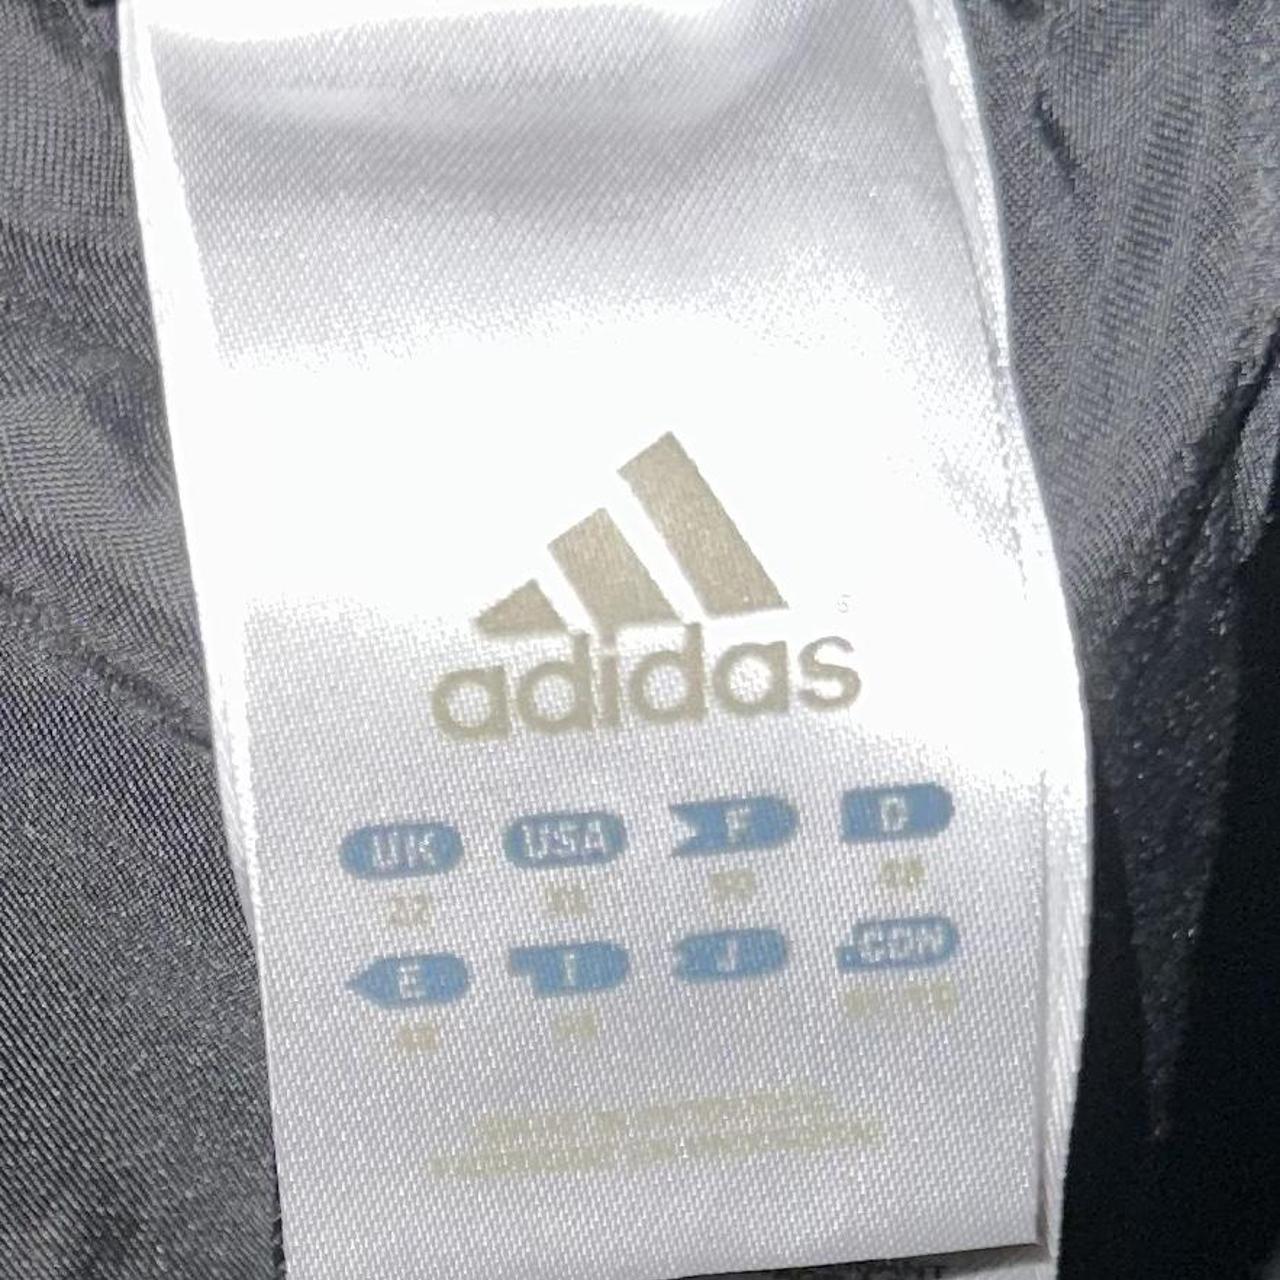 Adidas Men's Black and White Joggers-tracksuits (4)